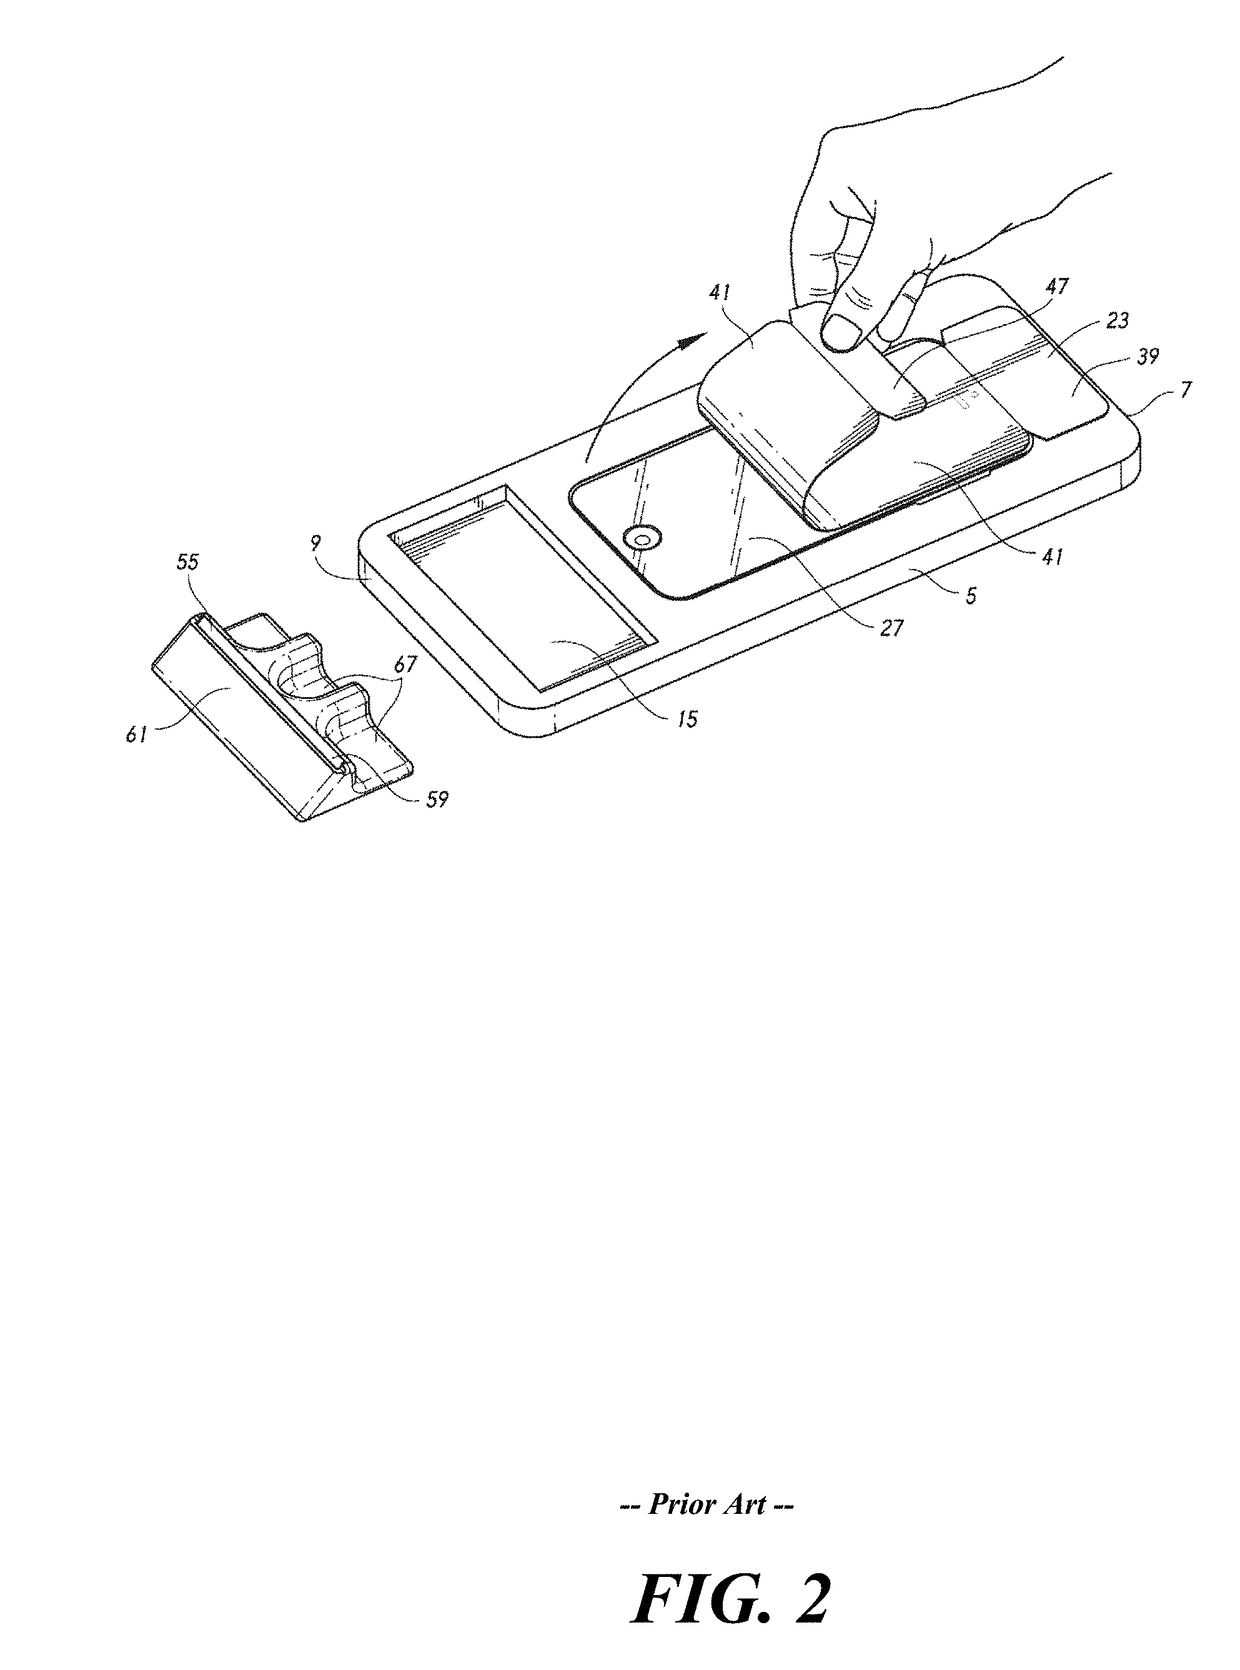 Tool for applying protective films to mobile communications devices